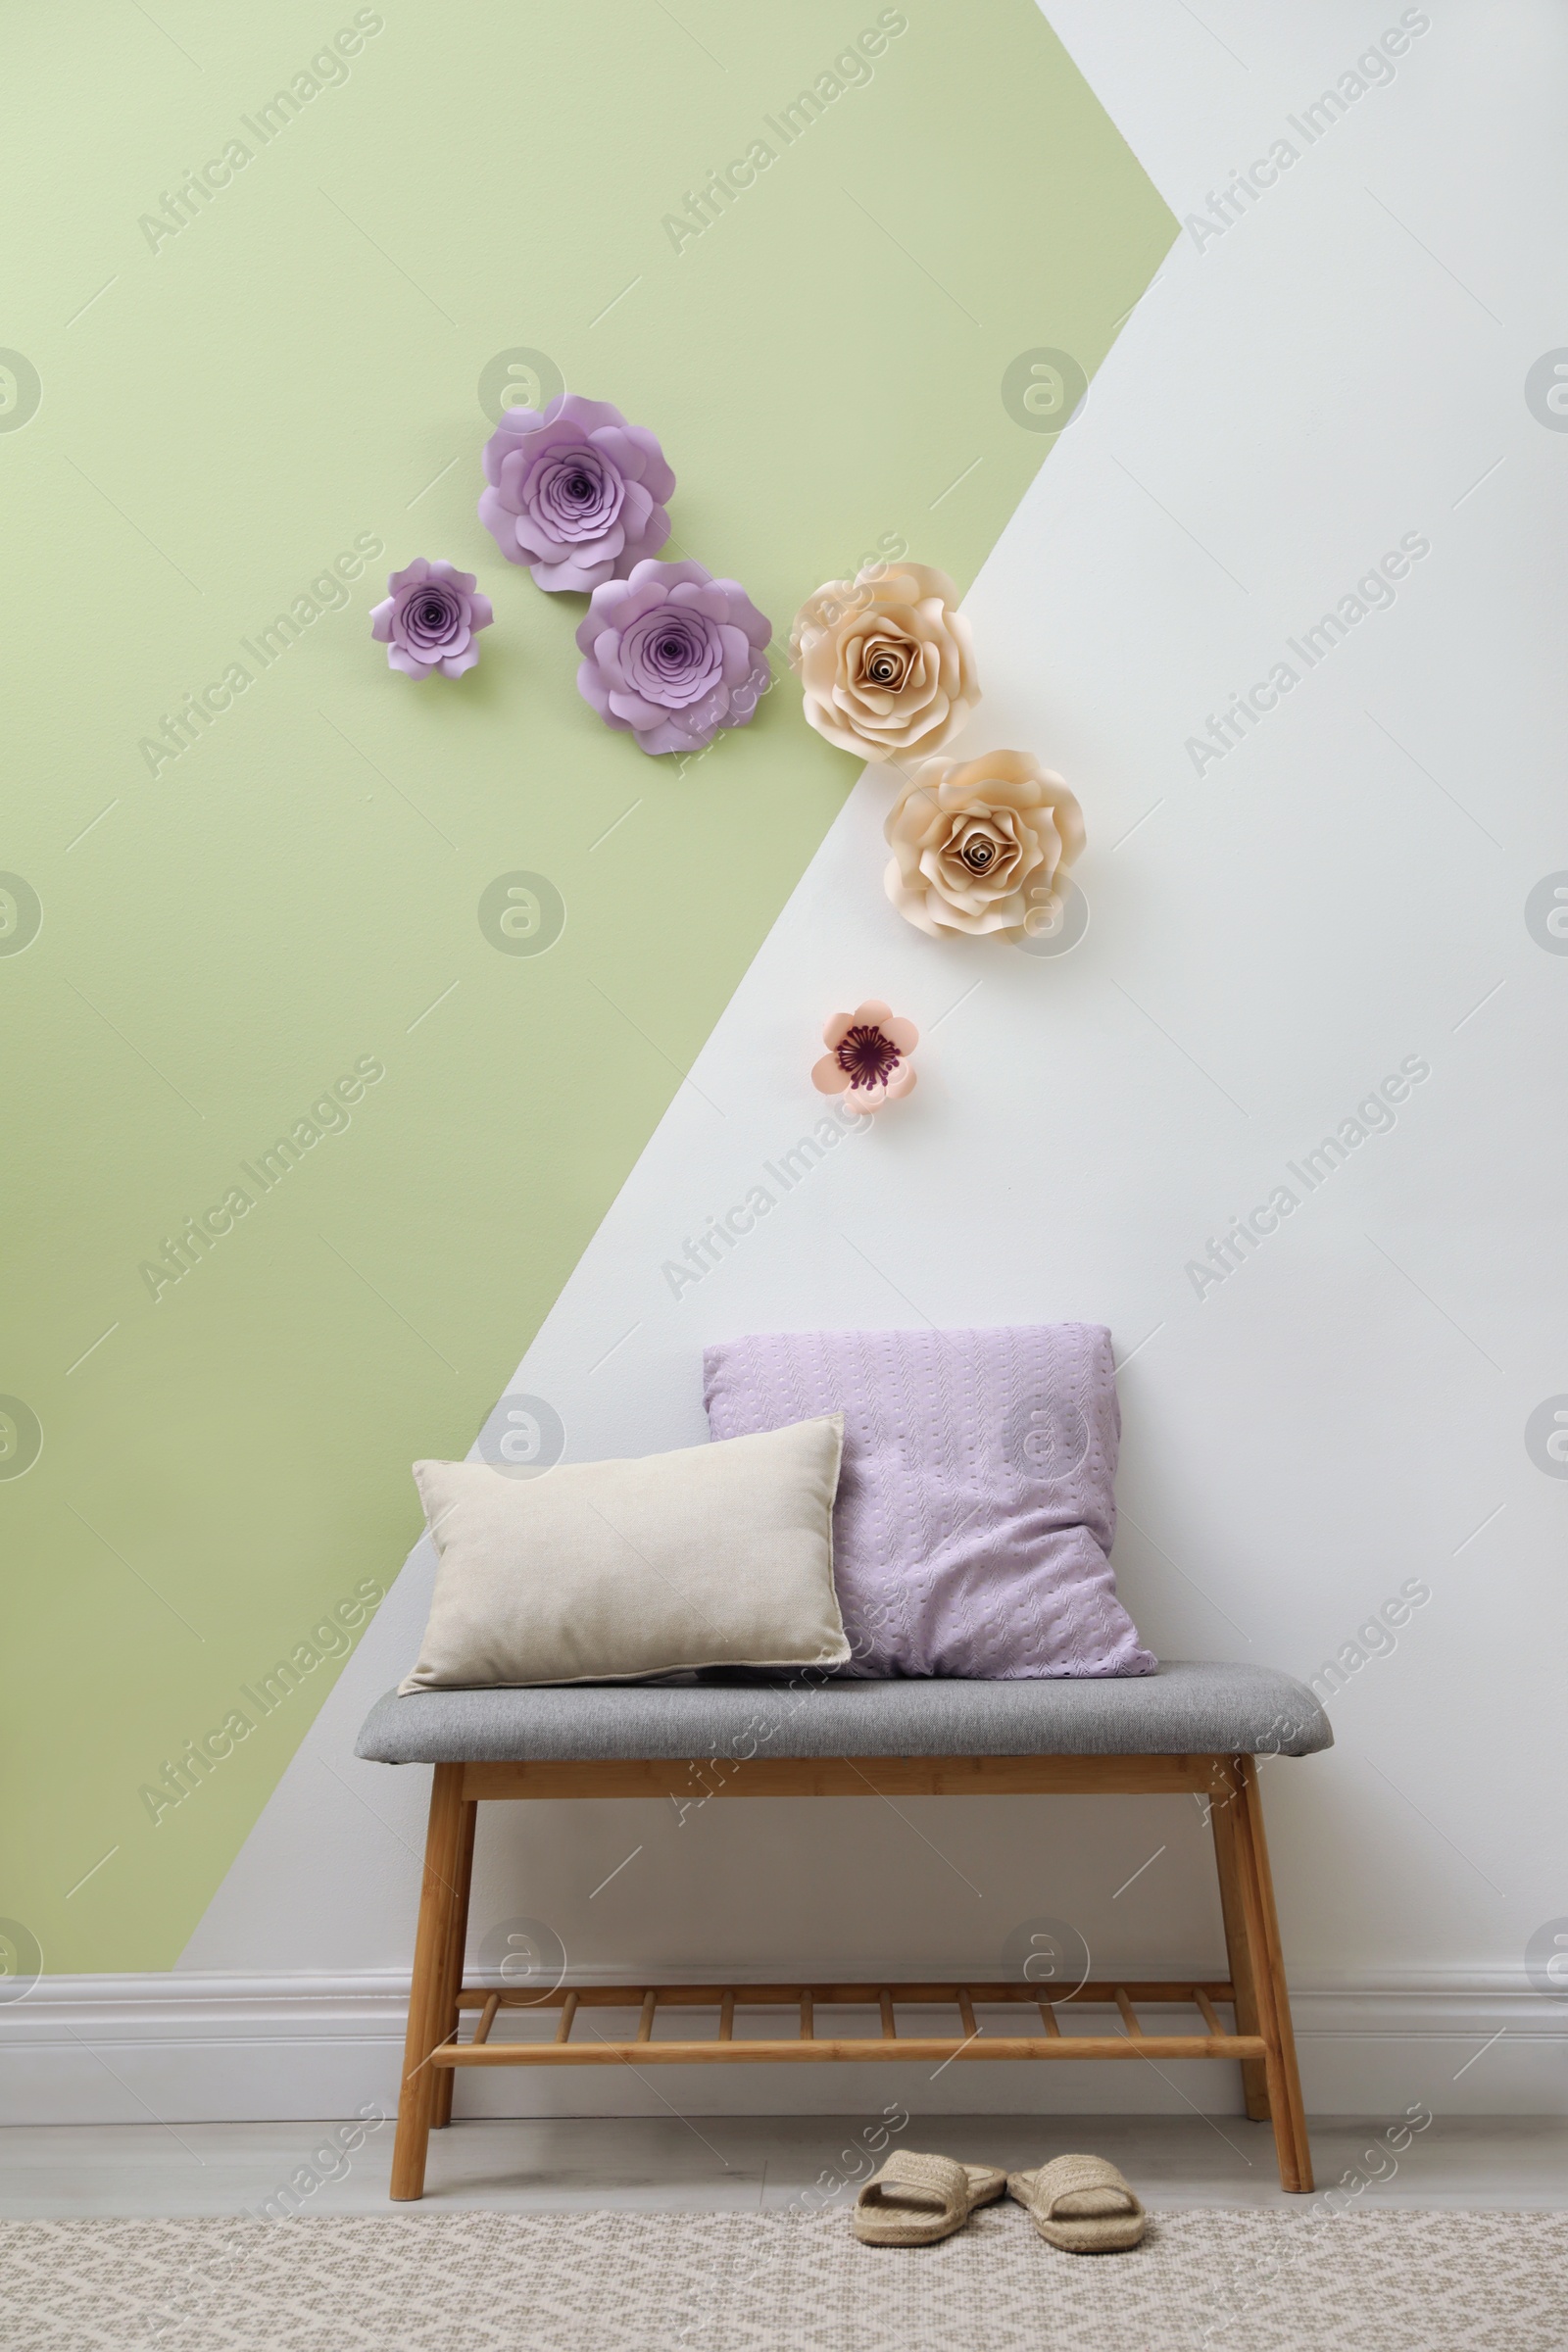 Photo of Stylish room interior with indoor bench and floral decor on wall